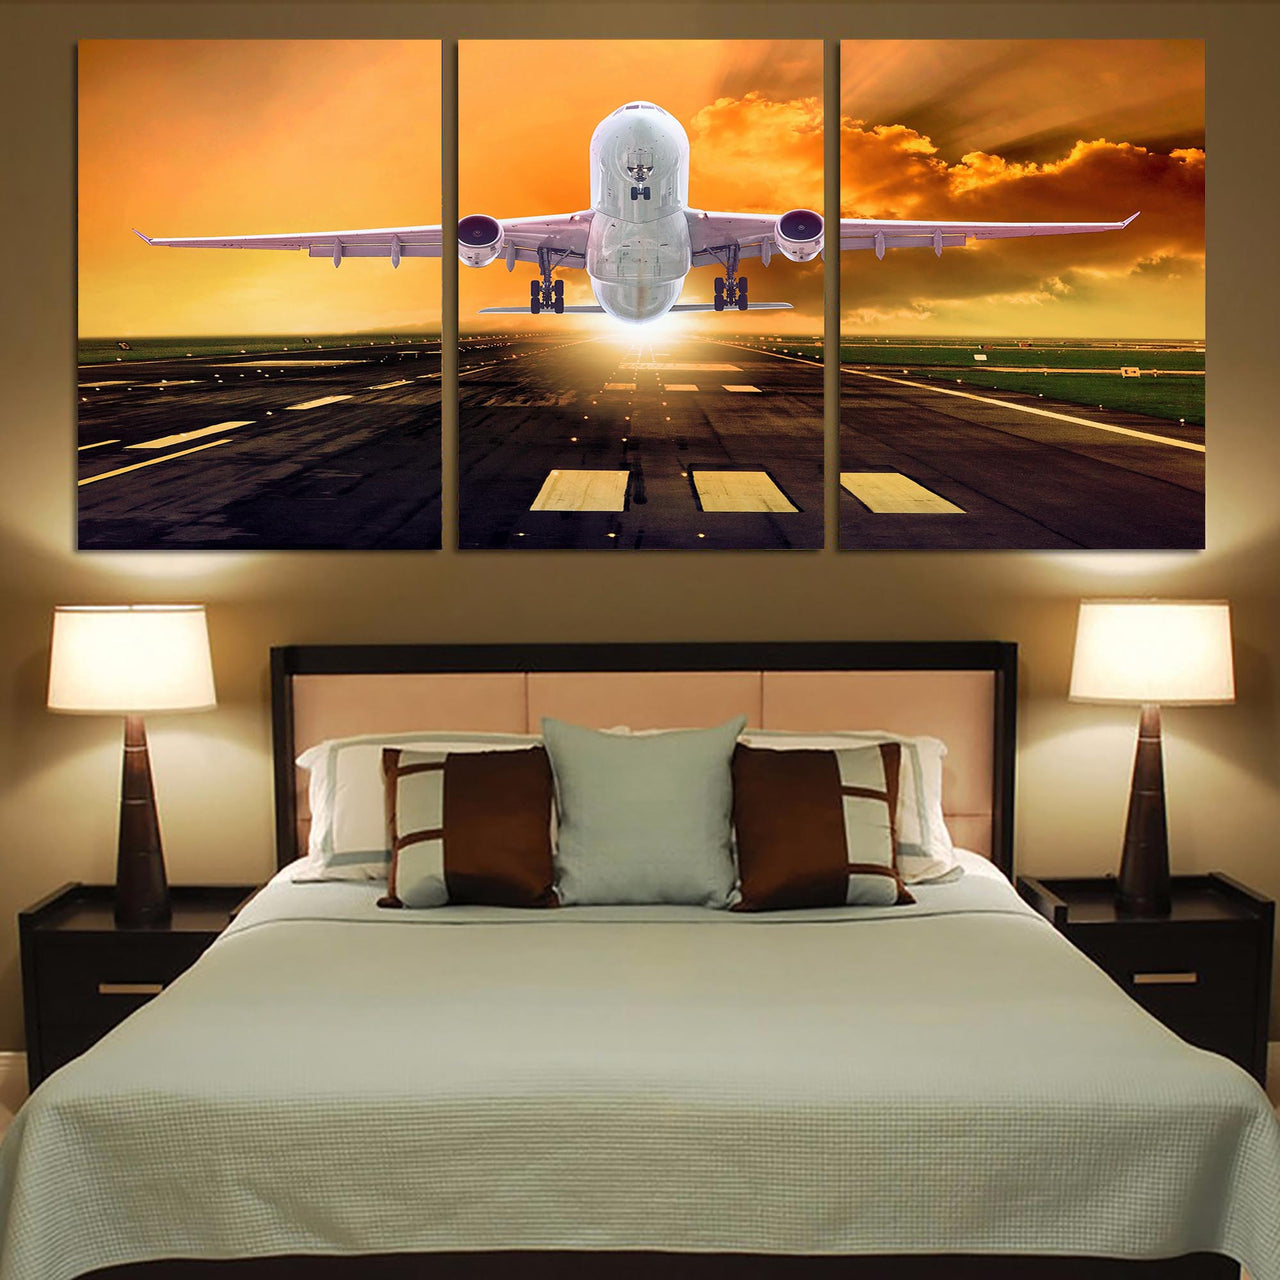 Amazing Departing Aircraft Sunset & Clouds Behind Printed Canvas Posters (3 Pieces)